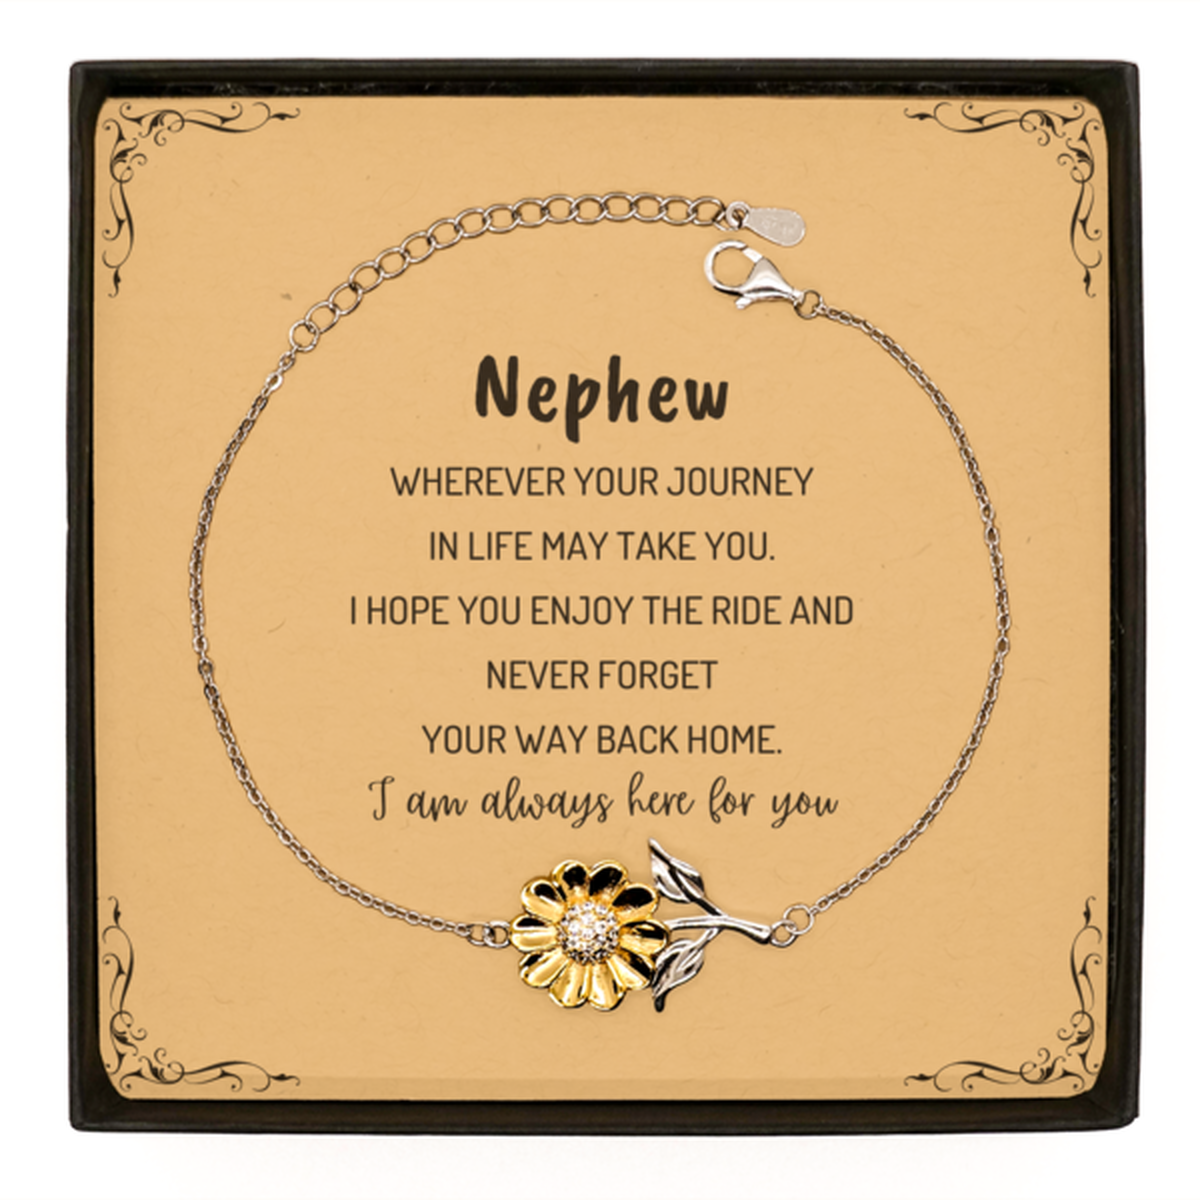 Nephew wherever your journey in life may take you, I am always here for you Nephew Sunflower Bracelet, Awesome Christmas Gifts For Nephew Message Card, Nephew Birthday Gifts for Men Women Family Loved One